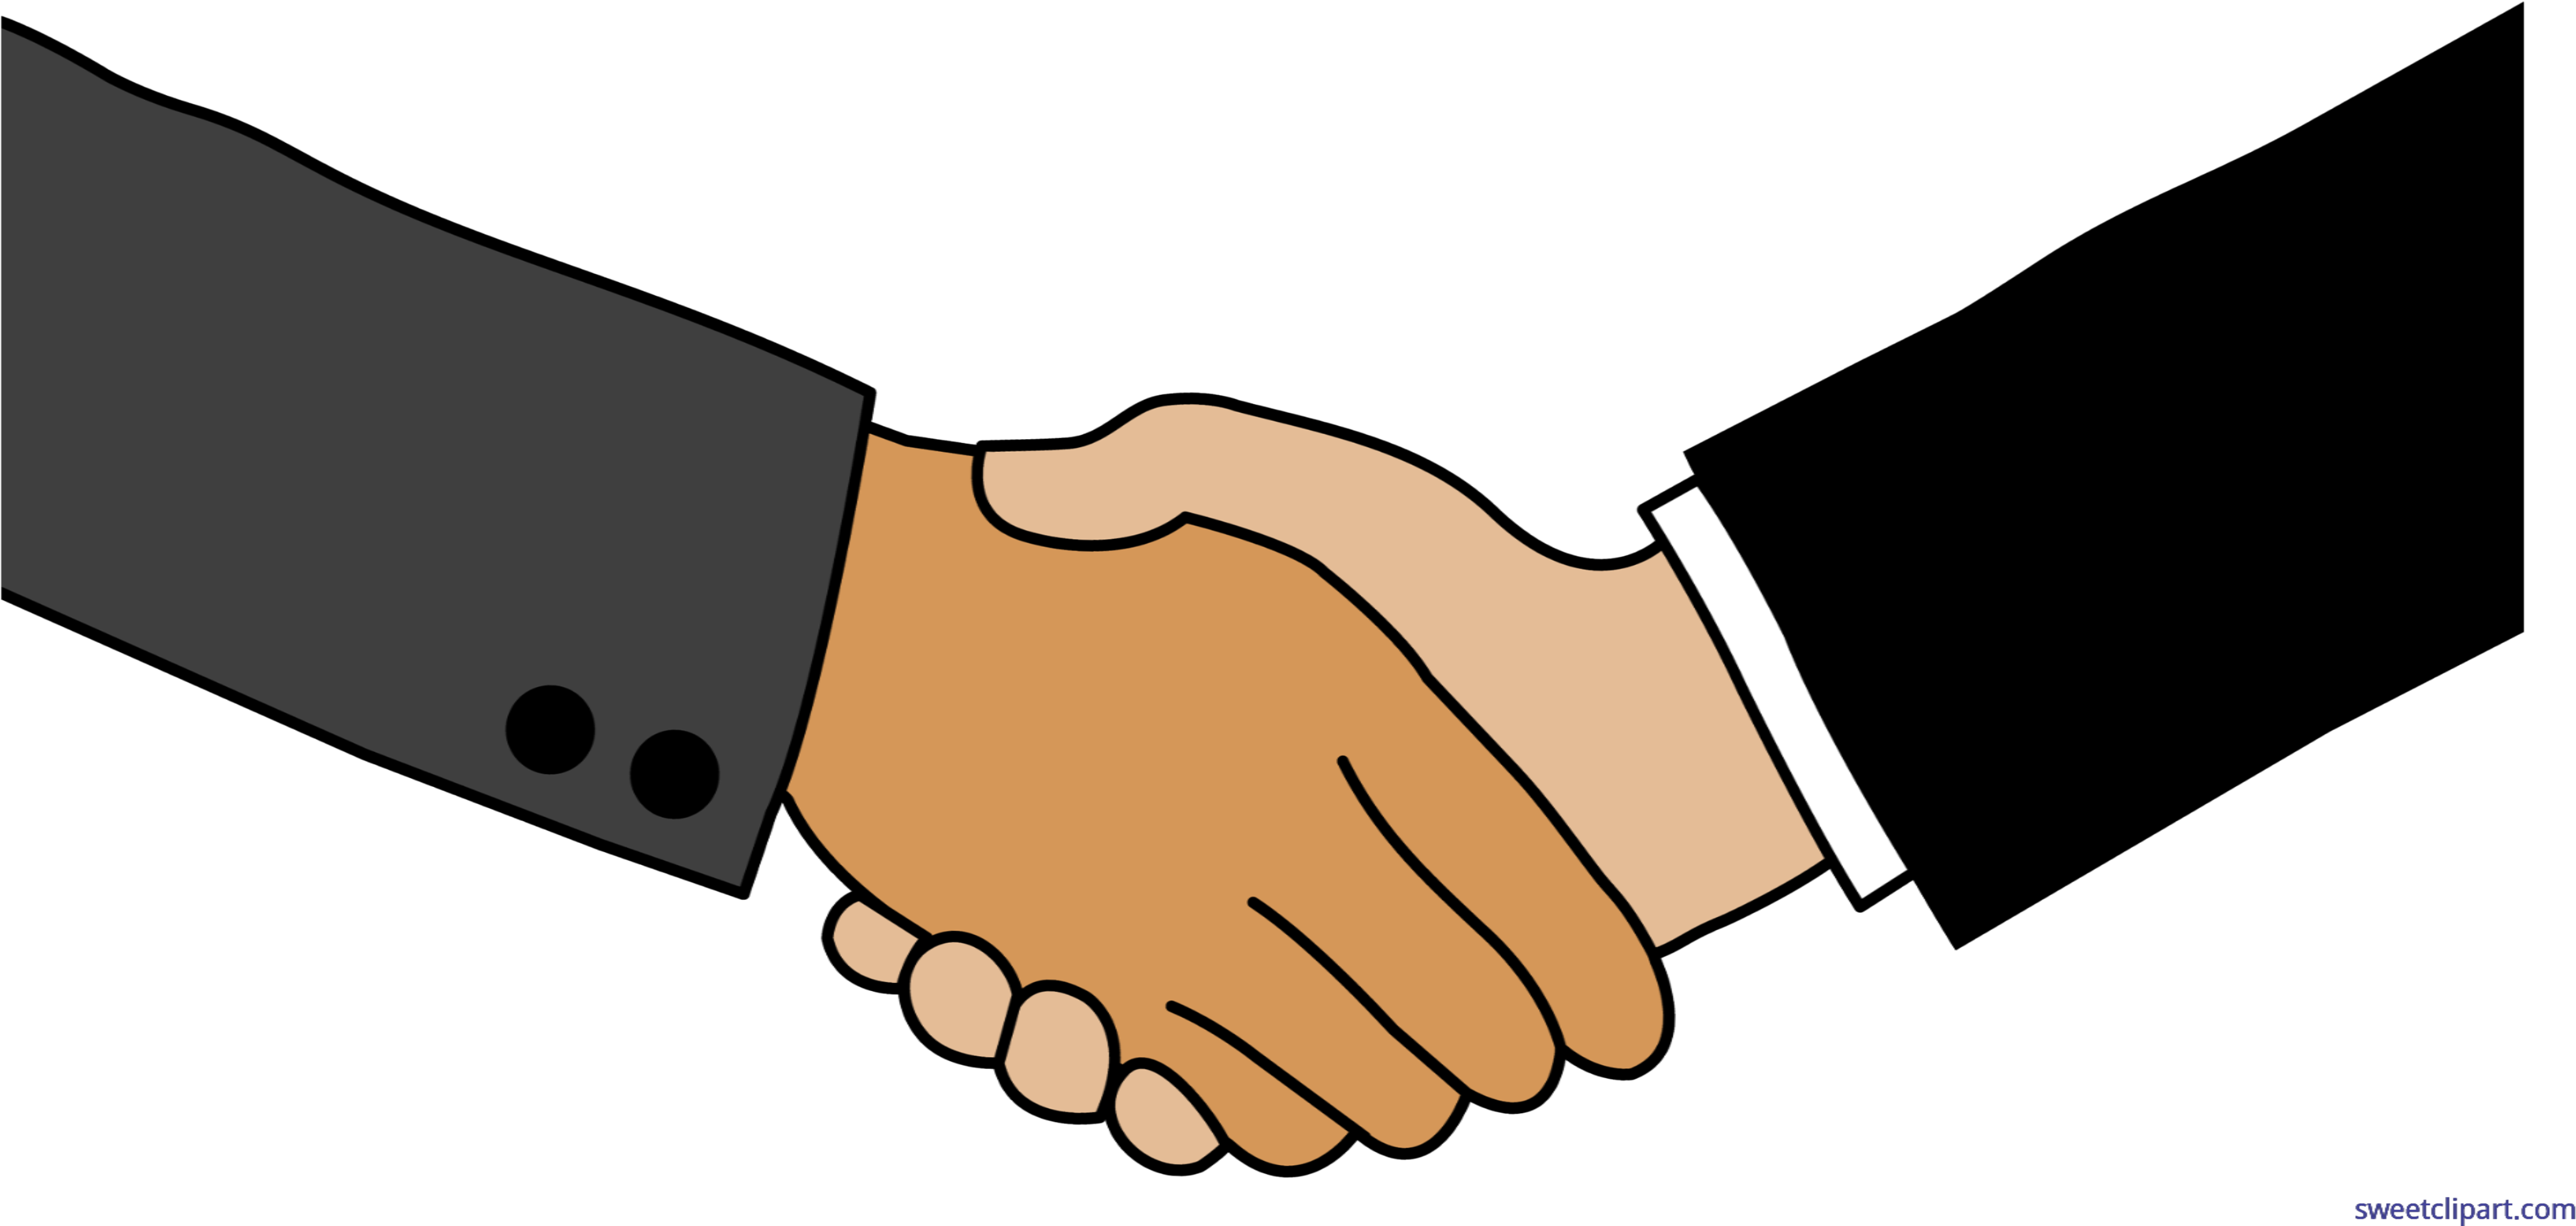 Professional Handshake Agreement.png PNG